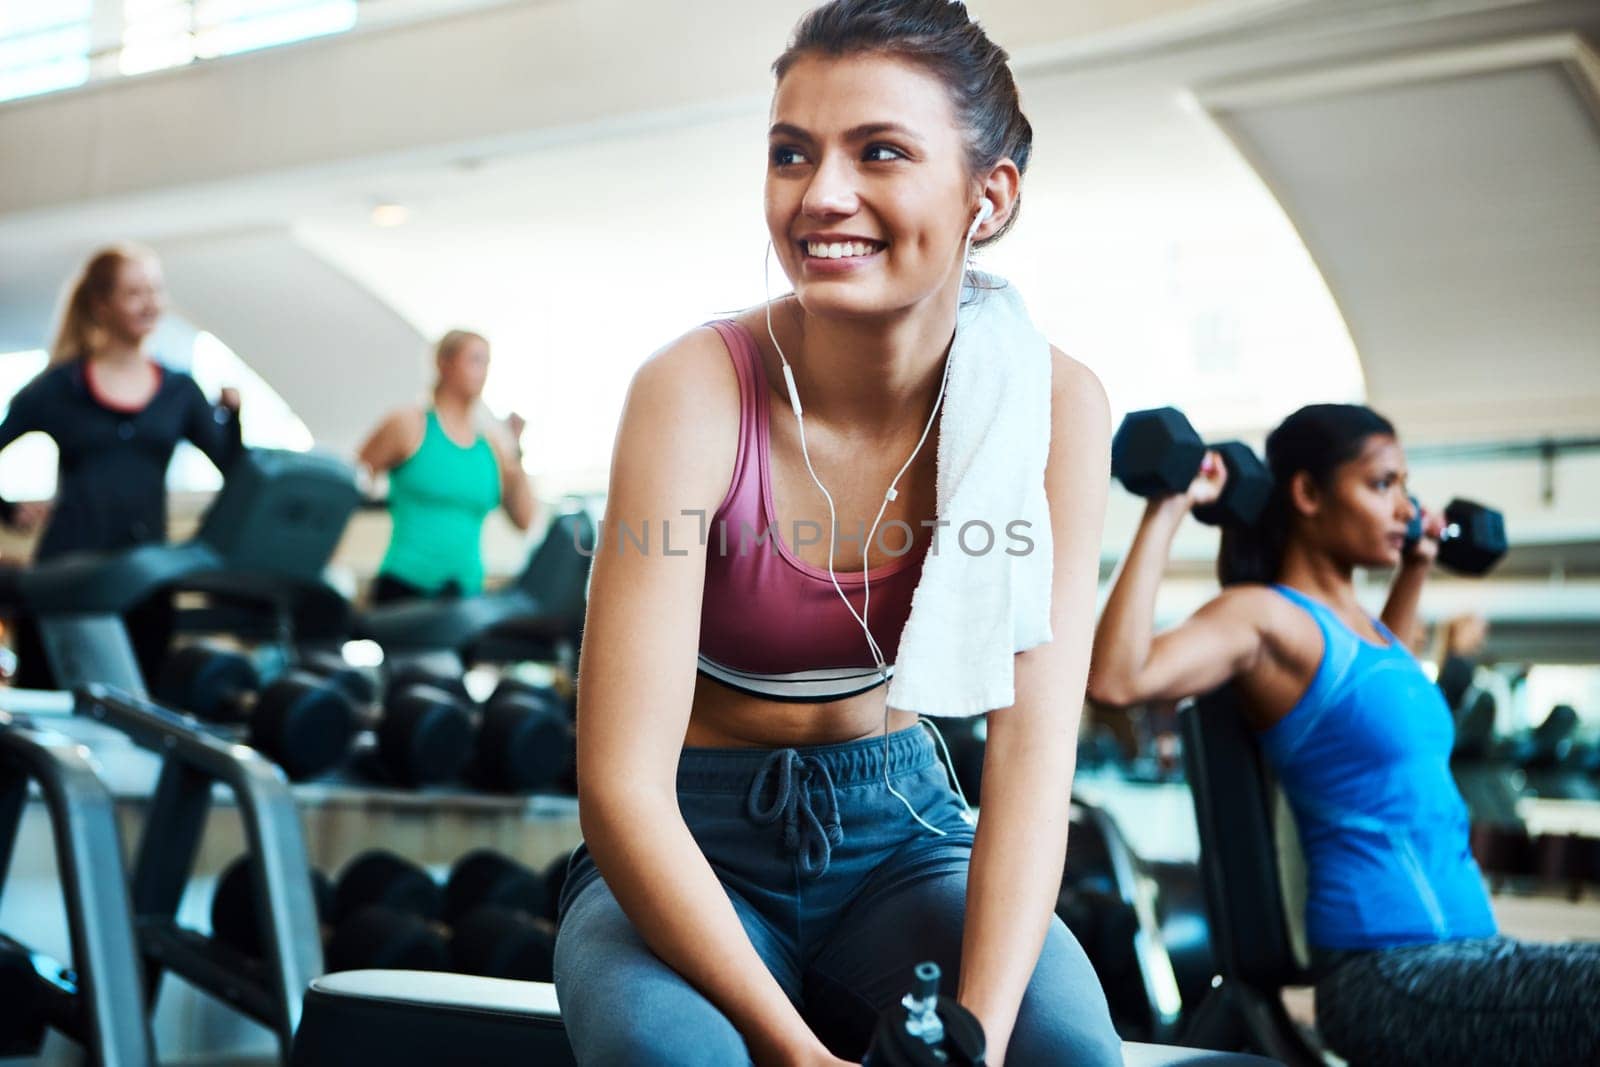 Now shes ready for a workout. an attractive young woman taking a break from her workout in the gym